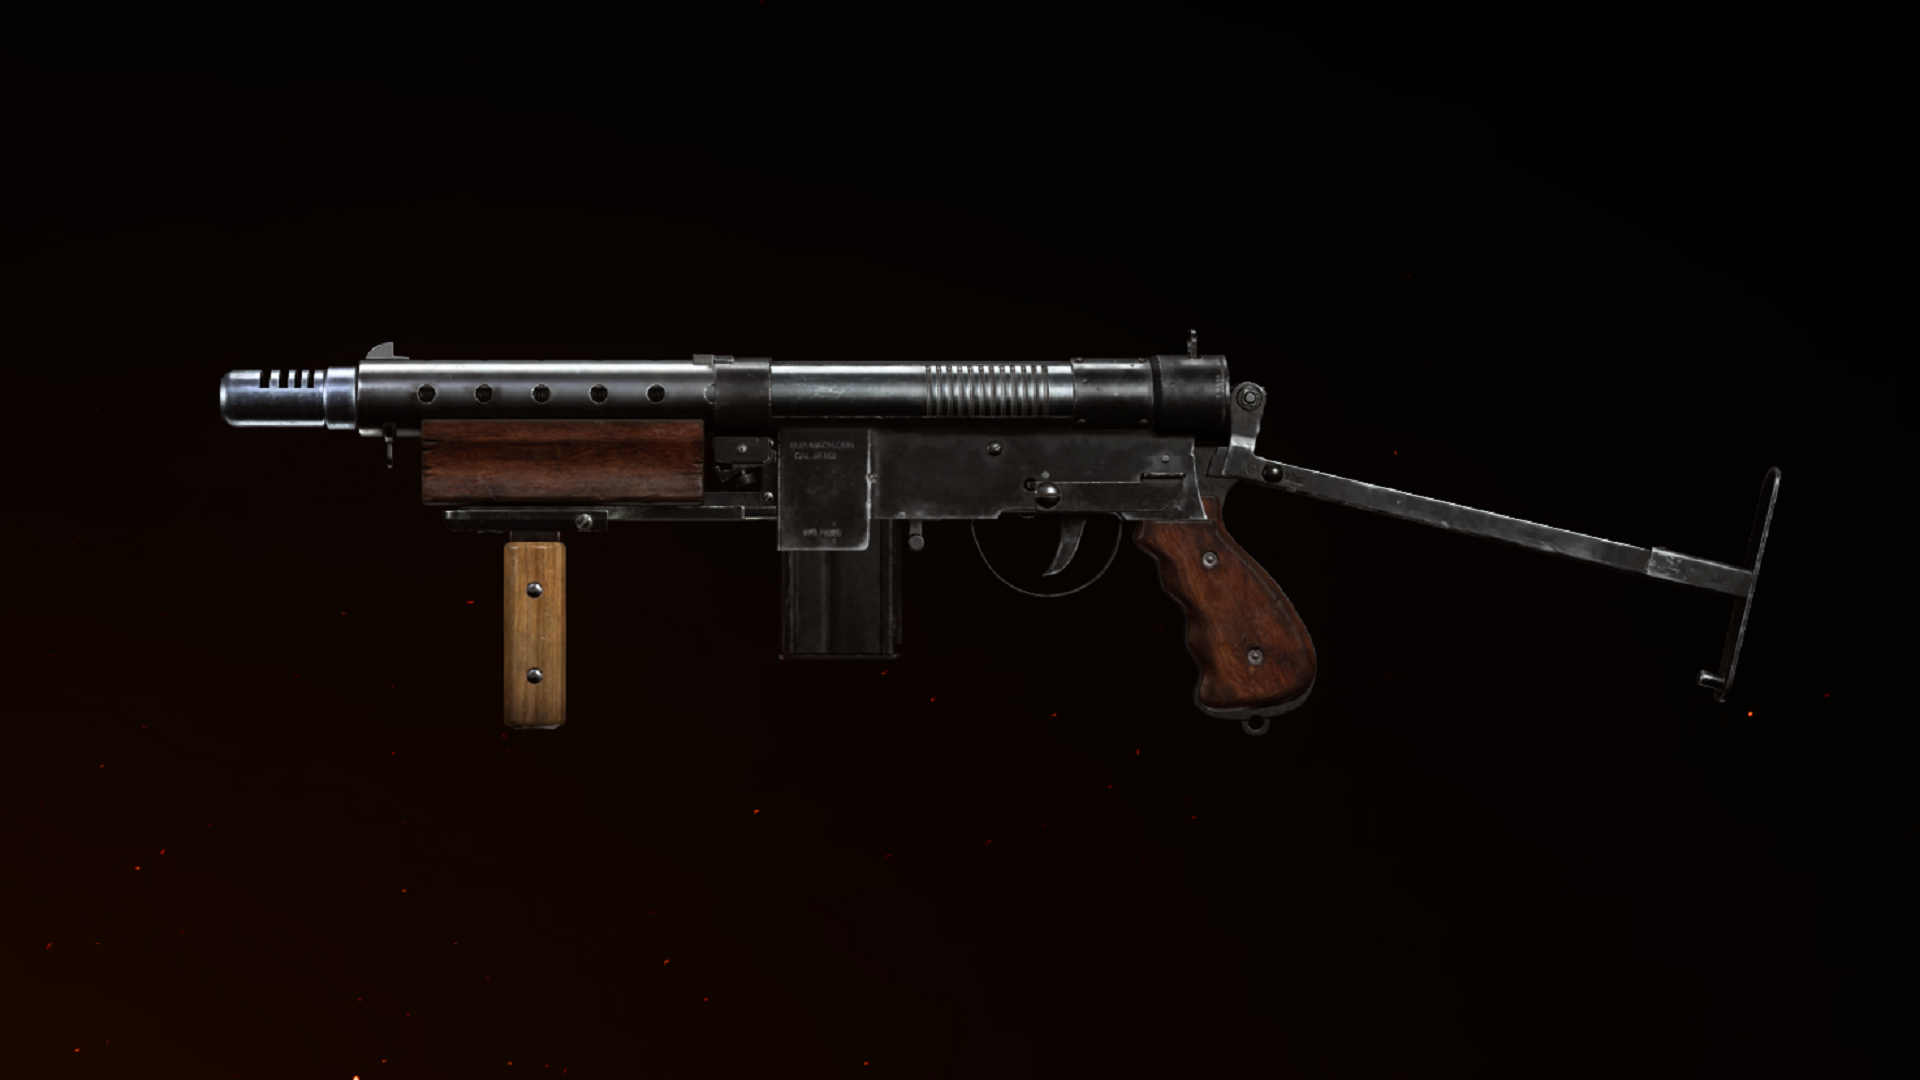 The Welgun in Call of Duty: Warzone